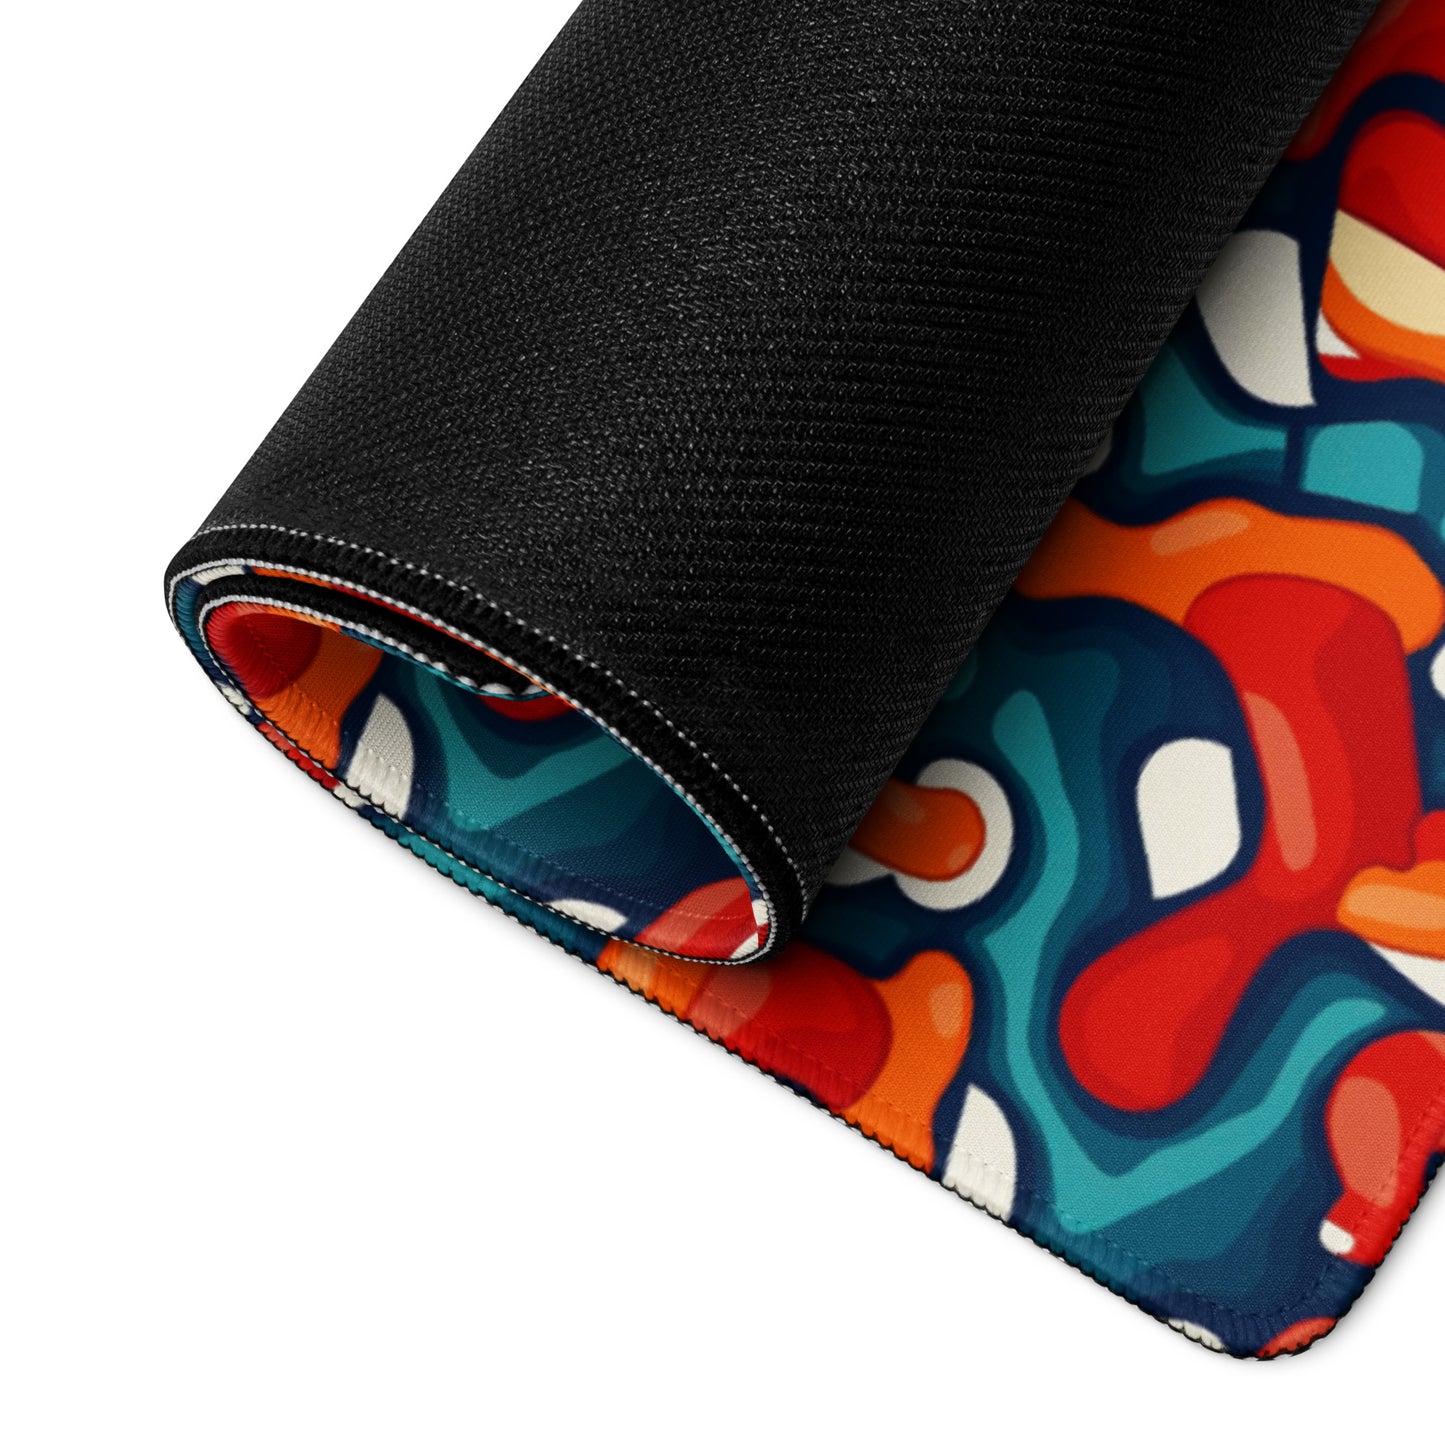 A 36" x 18" desk pad with abstract line art on it rolled up. Red, Teal and Orange in color.